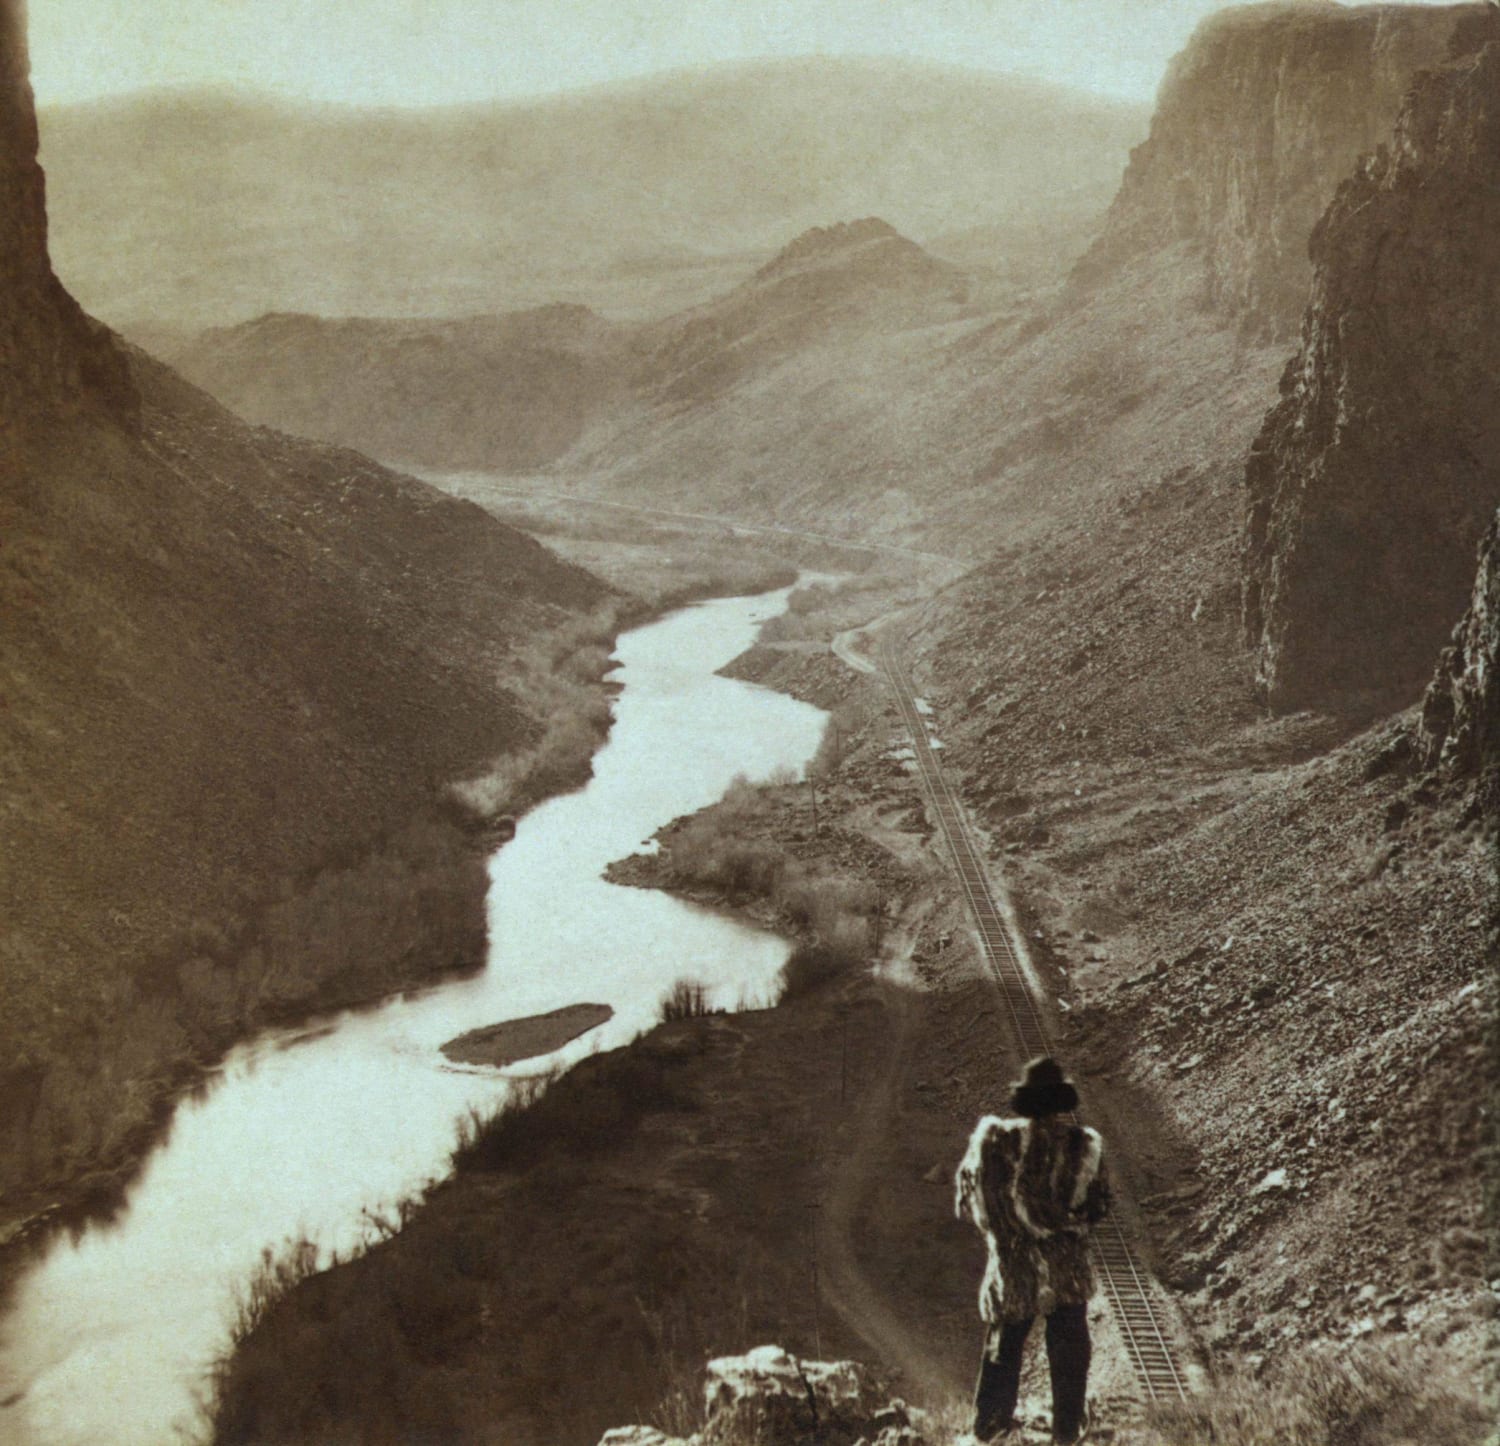 A native American man looking over the newly completed transcontinental railroad in Nevada, 1869.